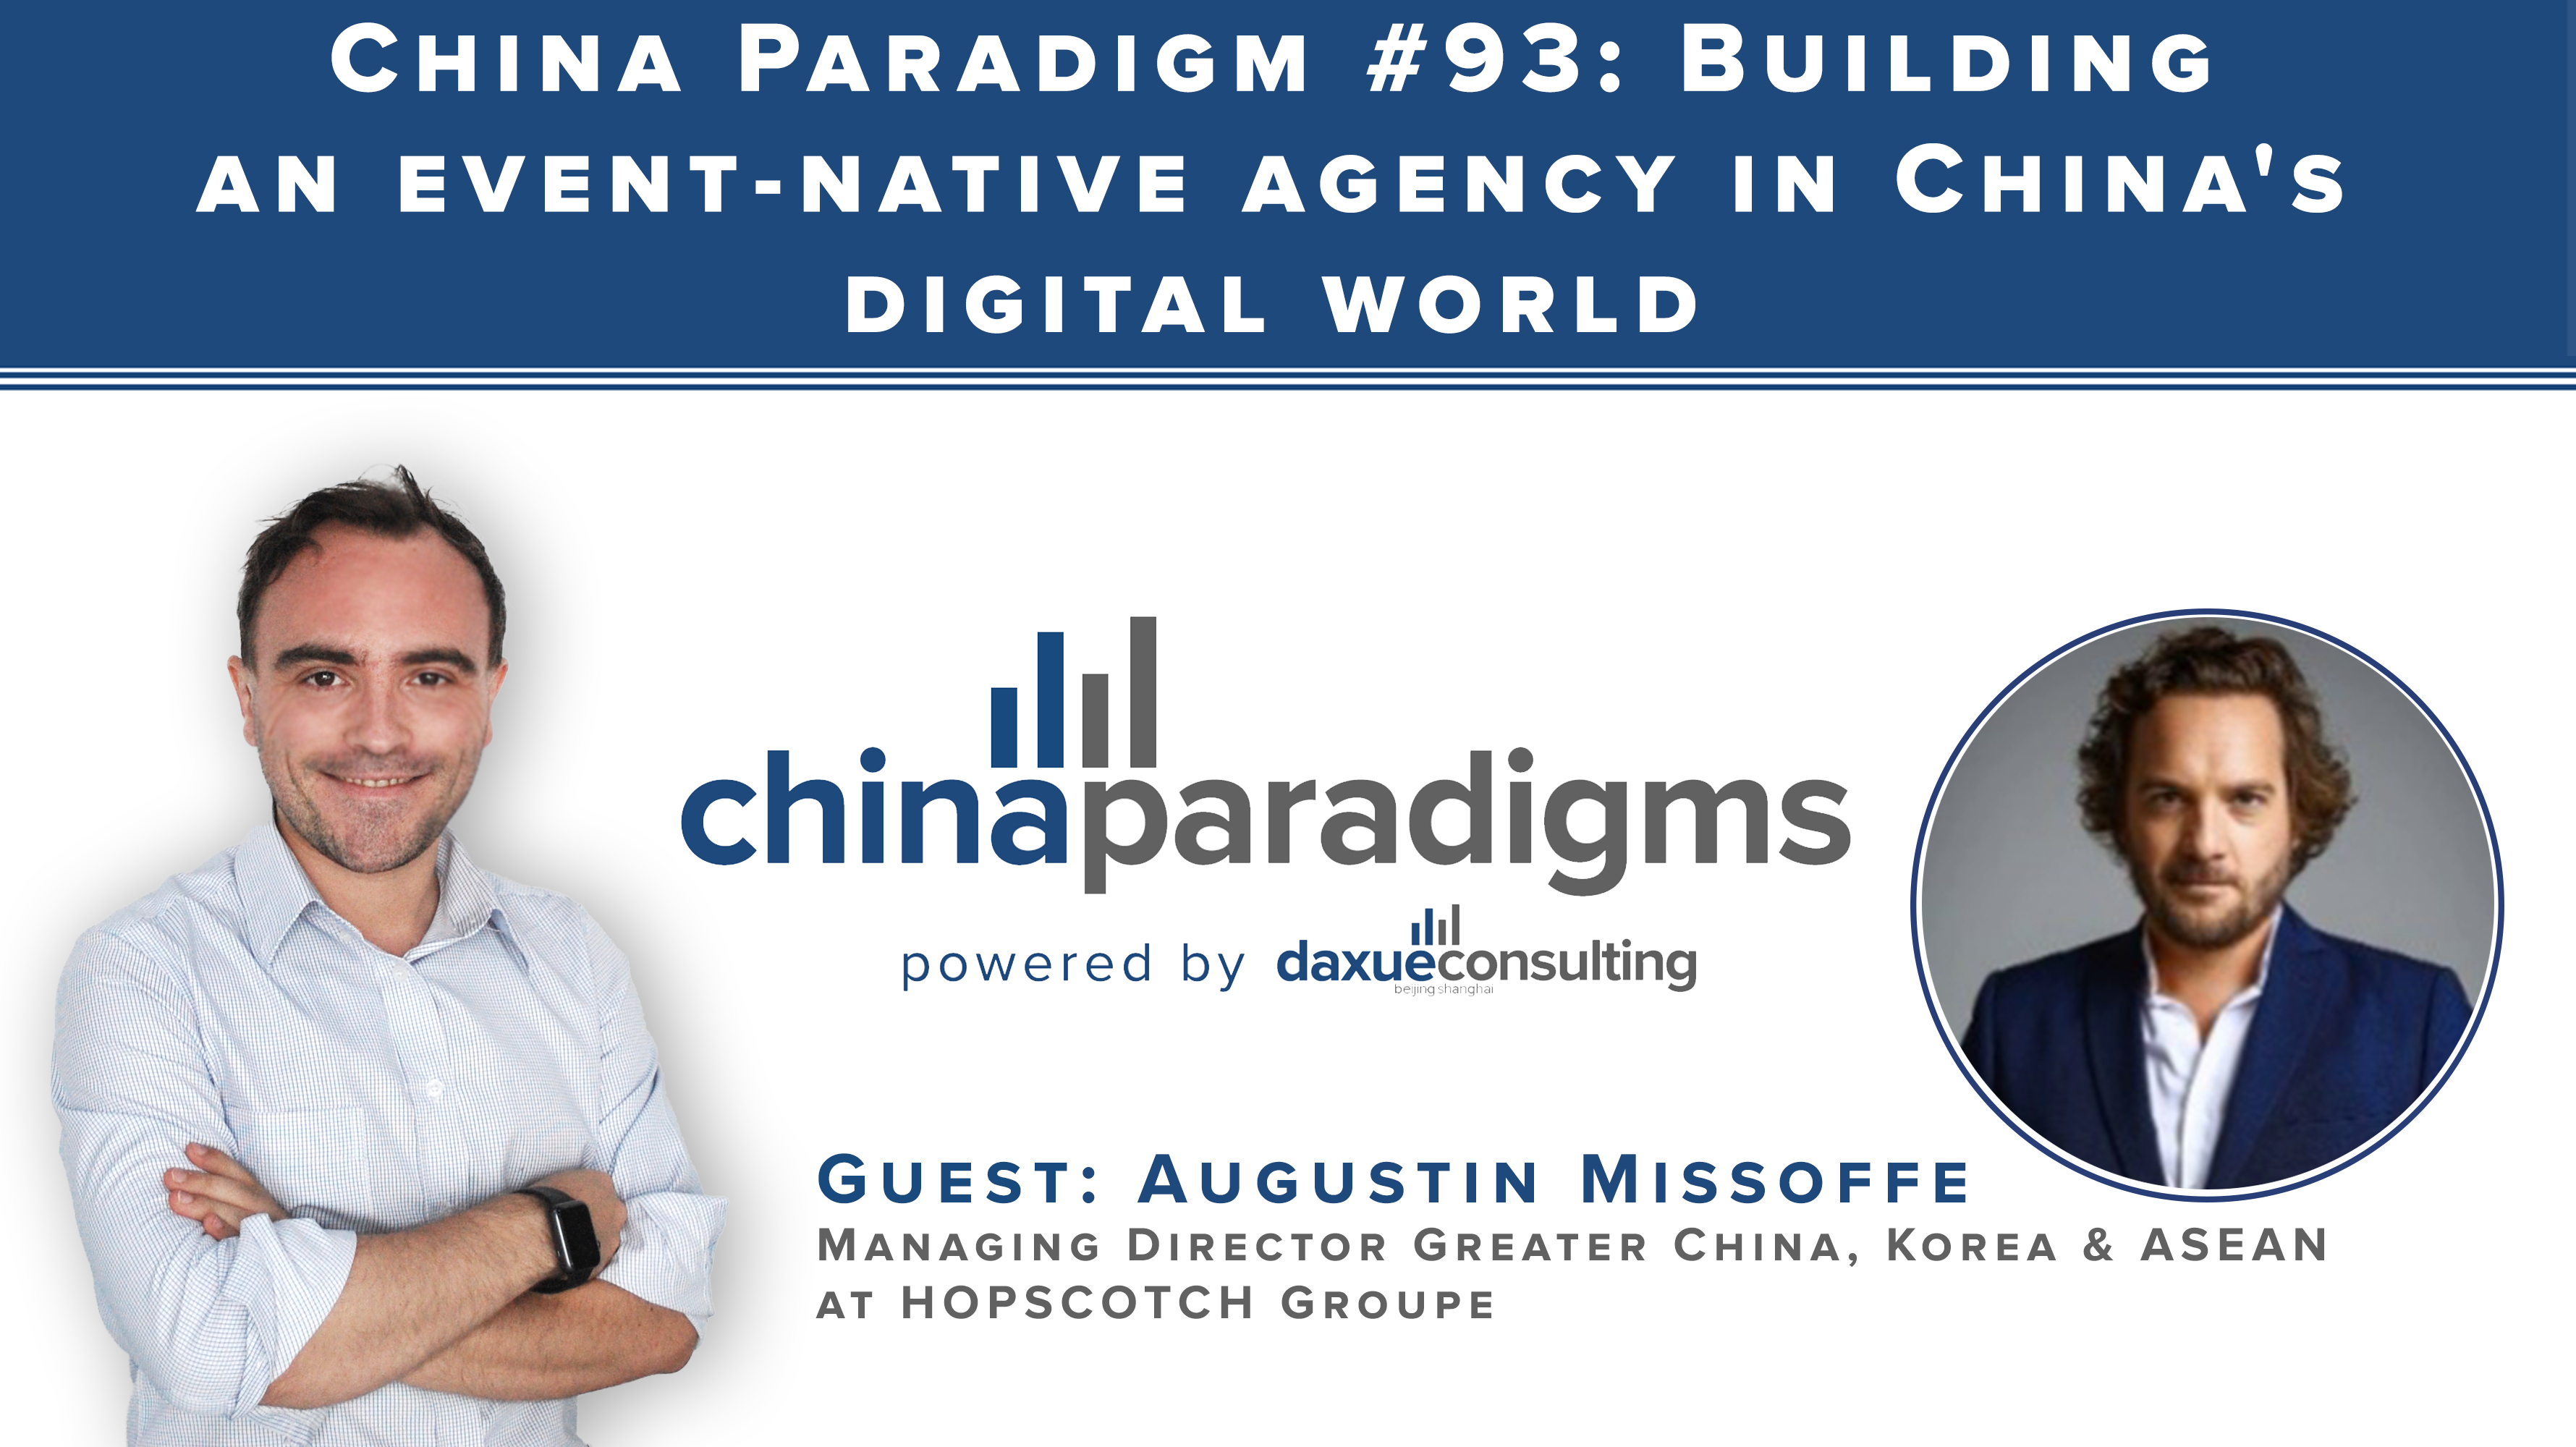 China Paradigm 93: Building an event-native agency in China’s digital world